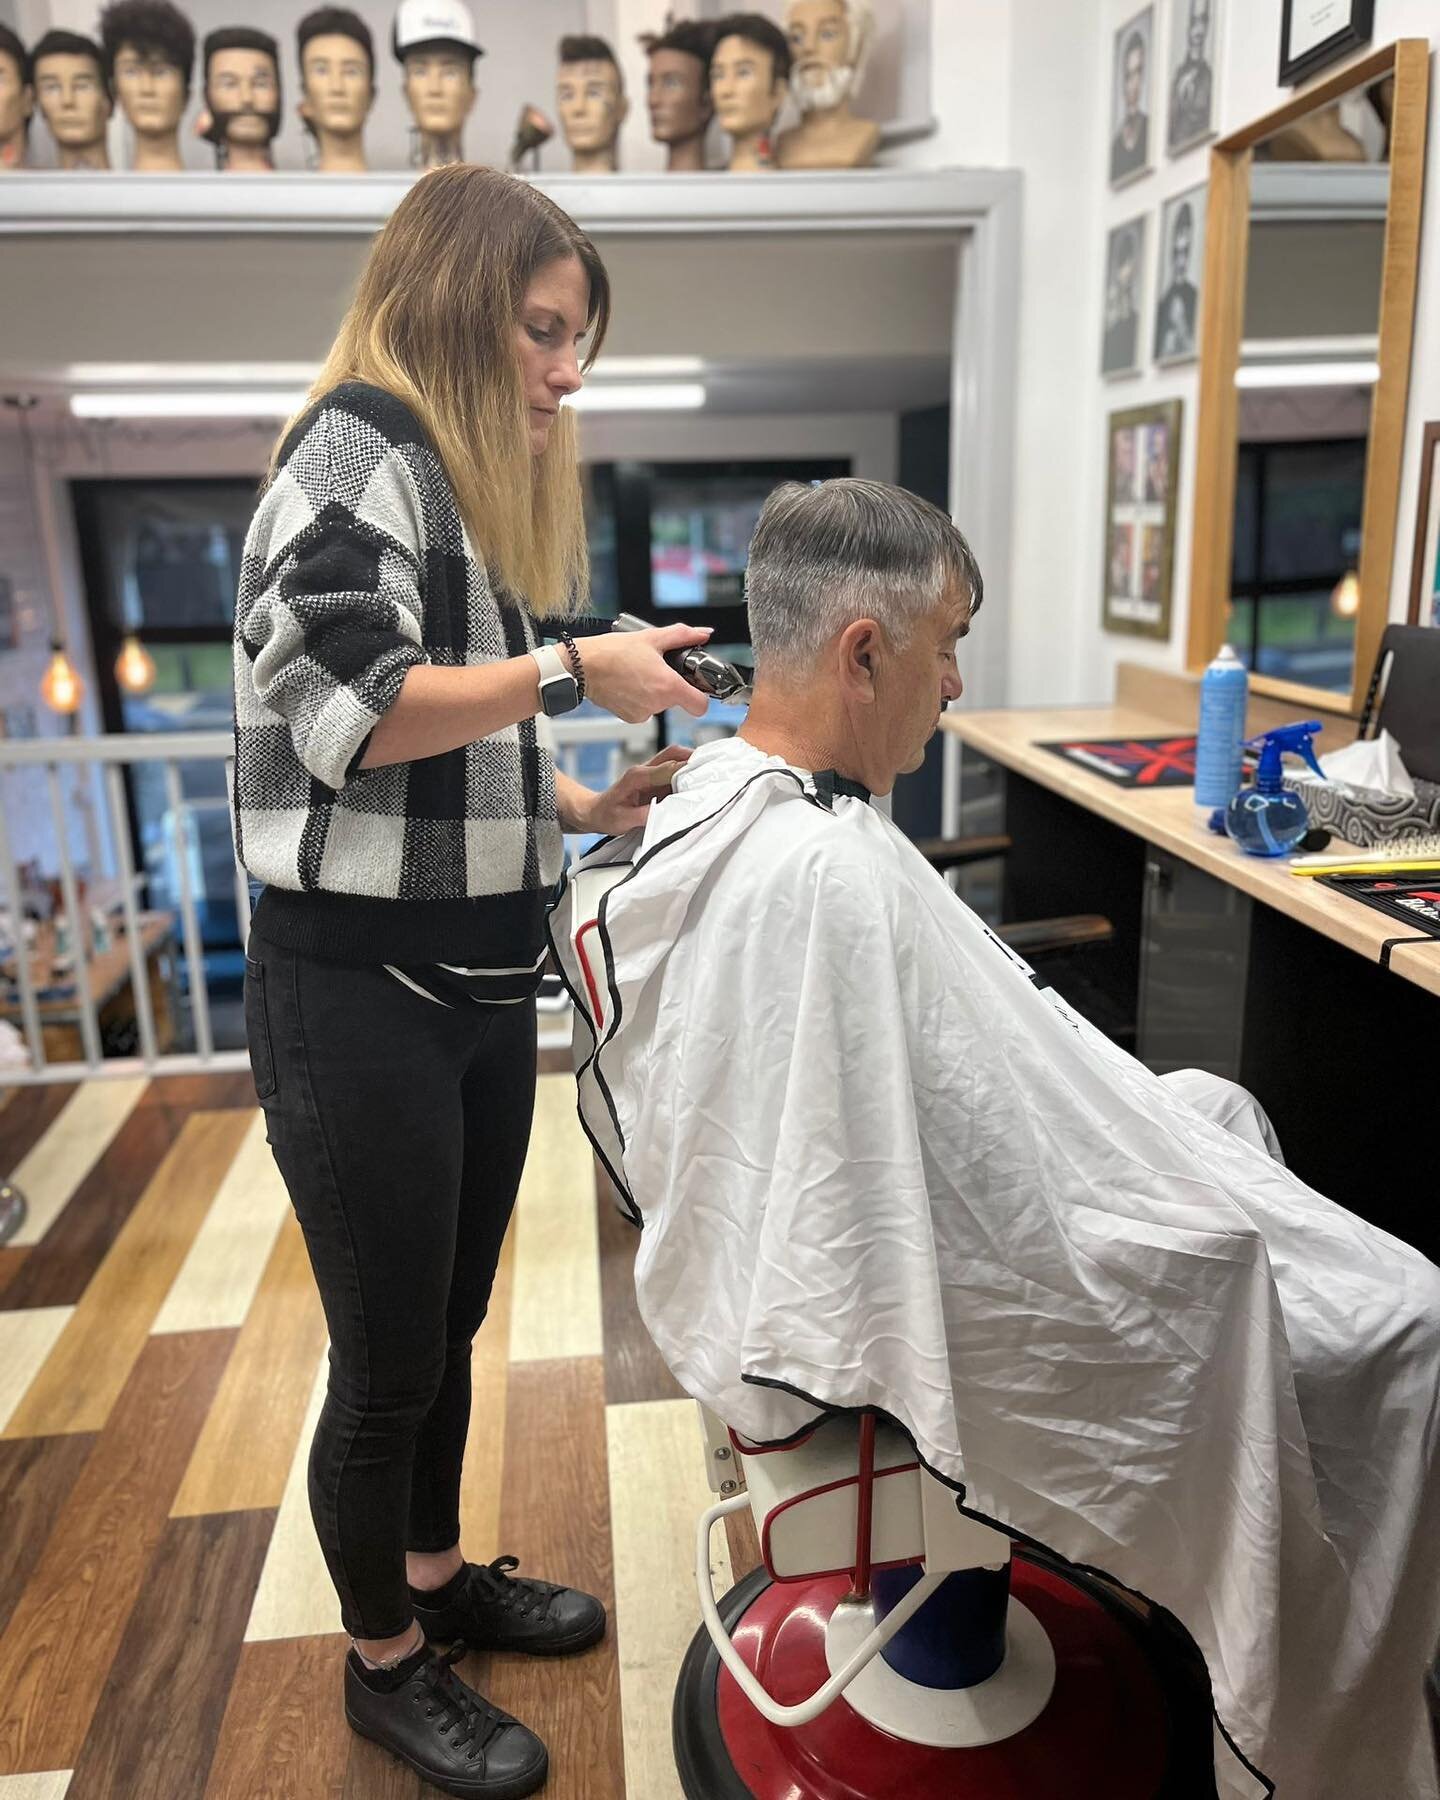 Today Hairdresser to Barber!!
Only a small class but that means quality time with our brilliant educator @barber_girl_hannah. #barberlove #Barberlife #barber #menshairdressing #mensgrooming #barbereducation #menshair #haireducation #miketayloreducati